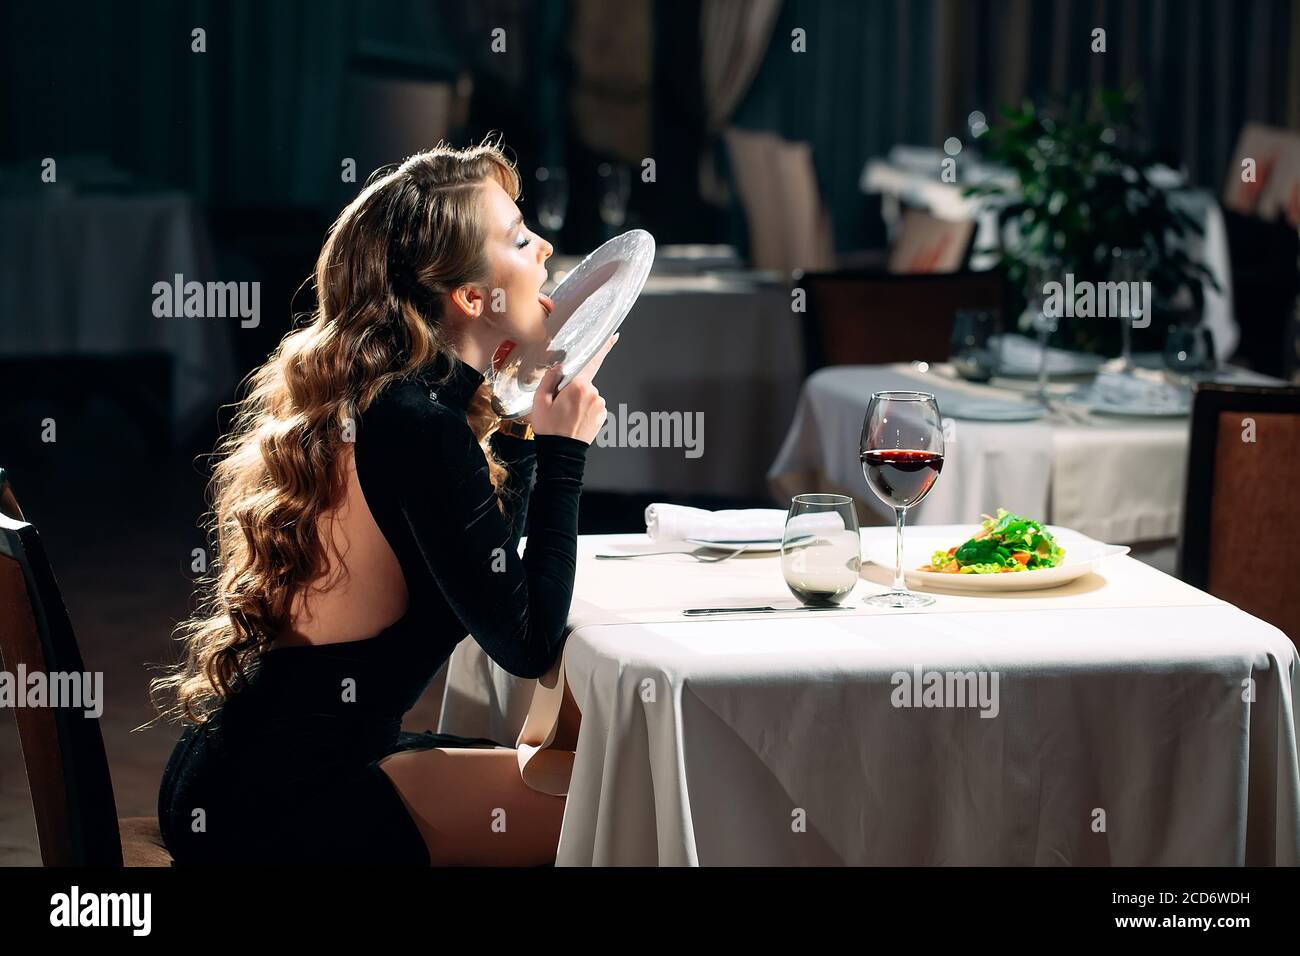 A young woman licks a plate in a restaurant. Stock Photo